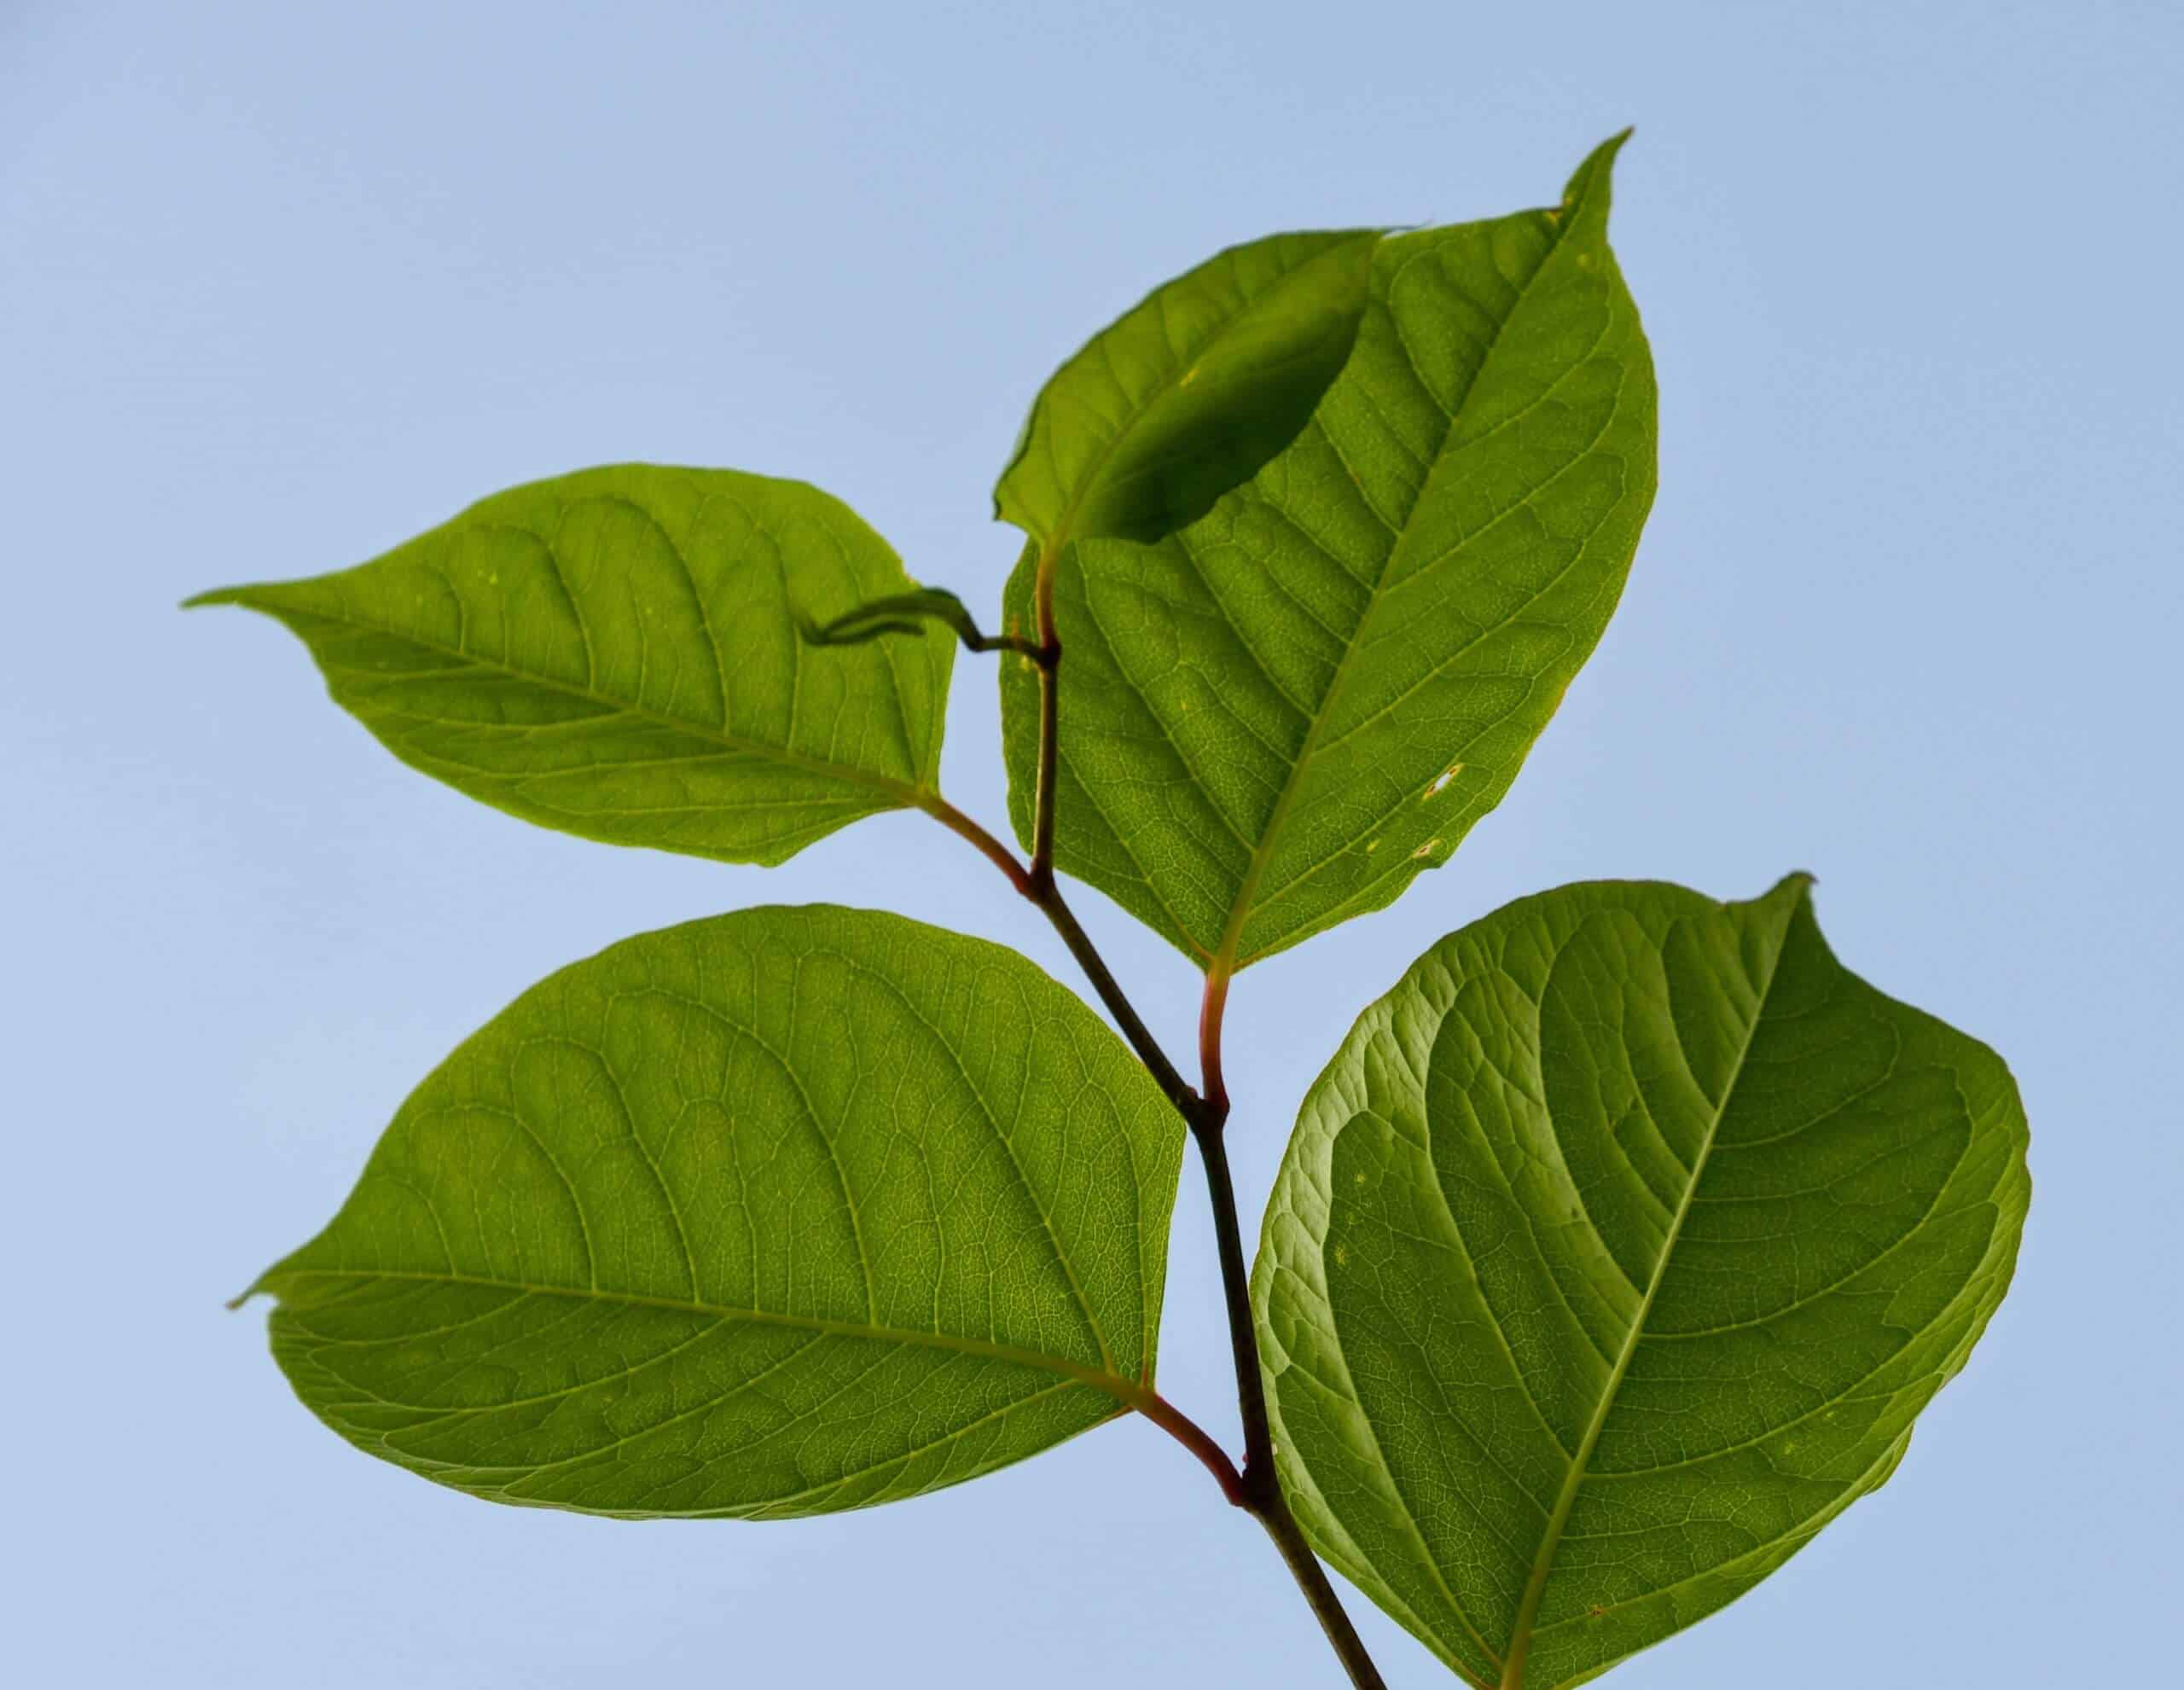 Japanese knotweed identification can cause confusion for those unaware of how many other plants it can be mistaken for scaled